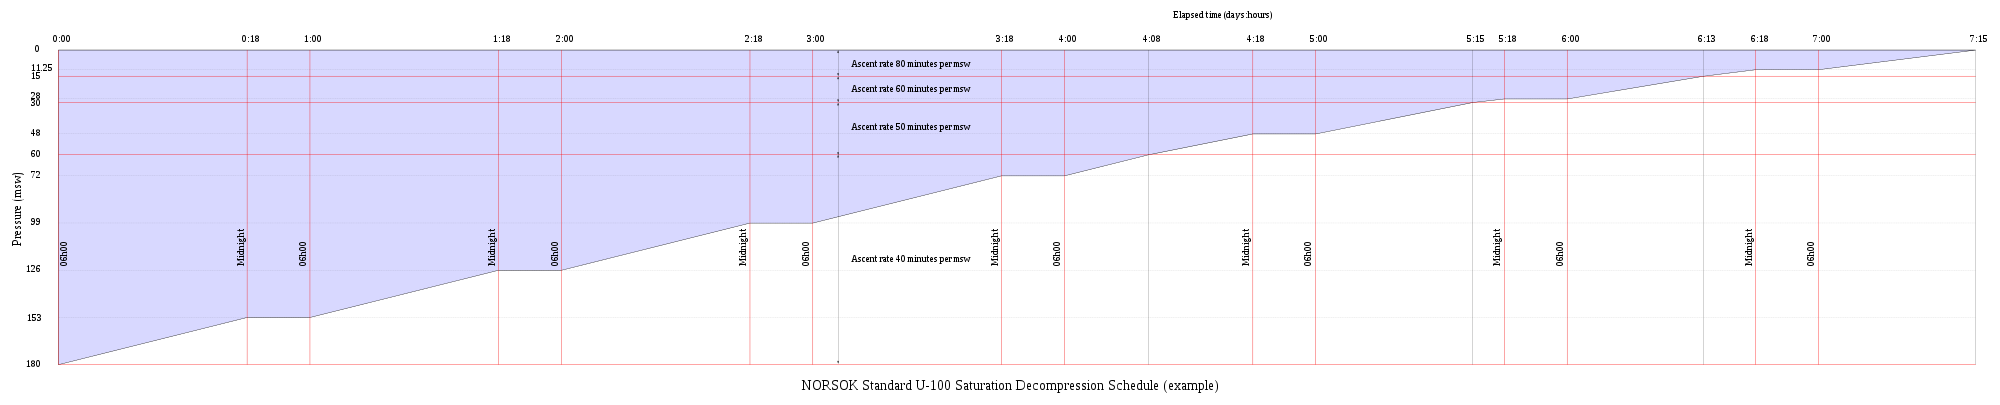 Graphic representation of the NORSOK U-100 (2009) saturation decompression schedule from 180 msw, starting at 06h00 and taking 7 days, 15 hours